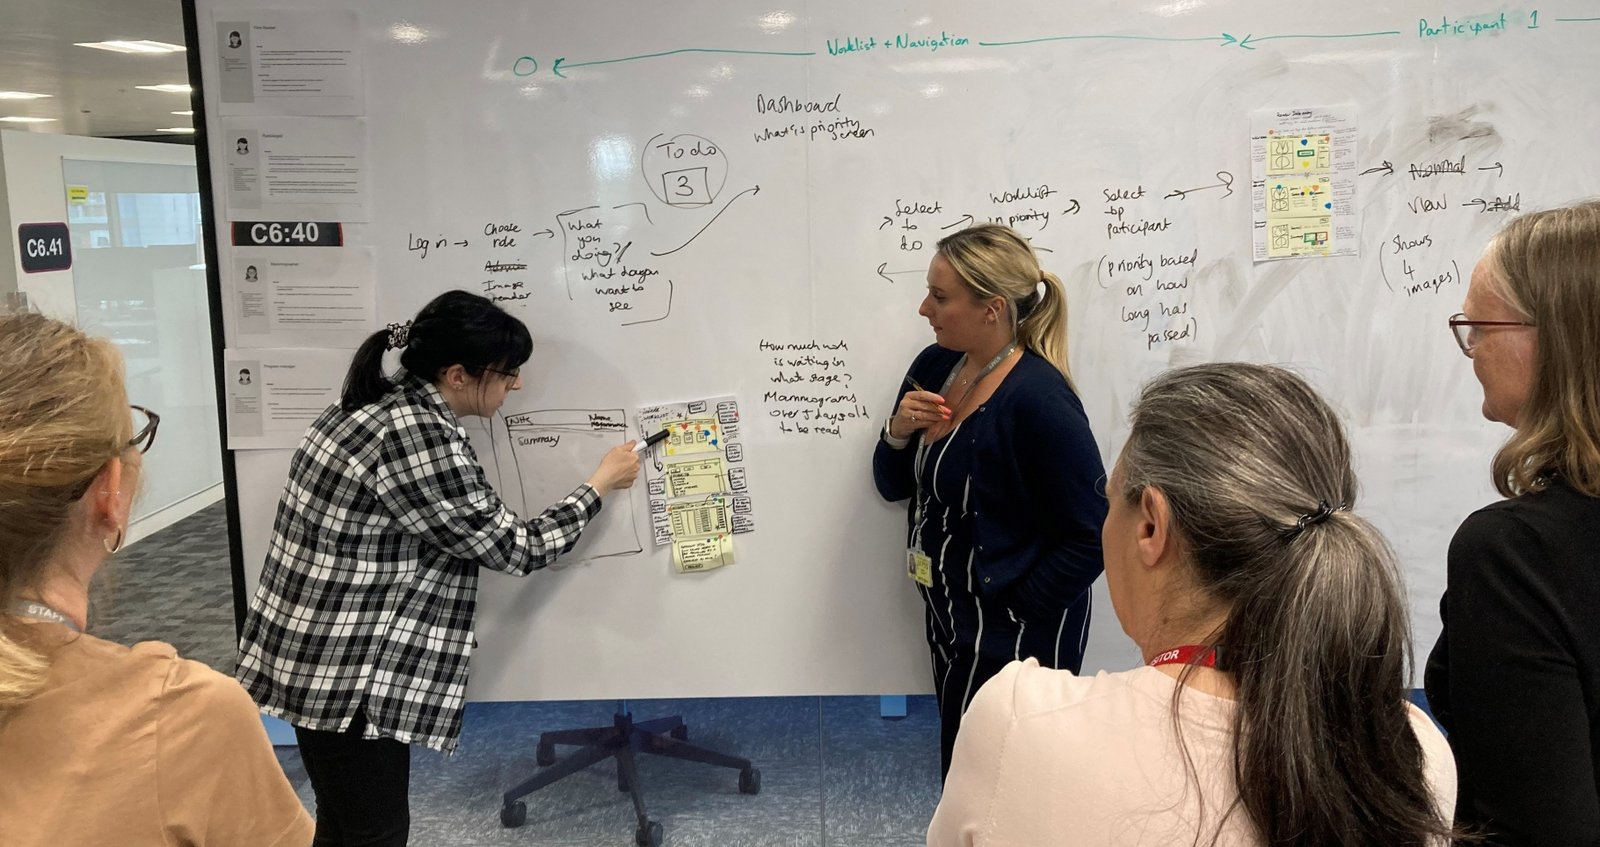 The design sprint team discussing ideas in front of a white board filled with writing and post-its